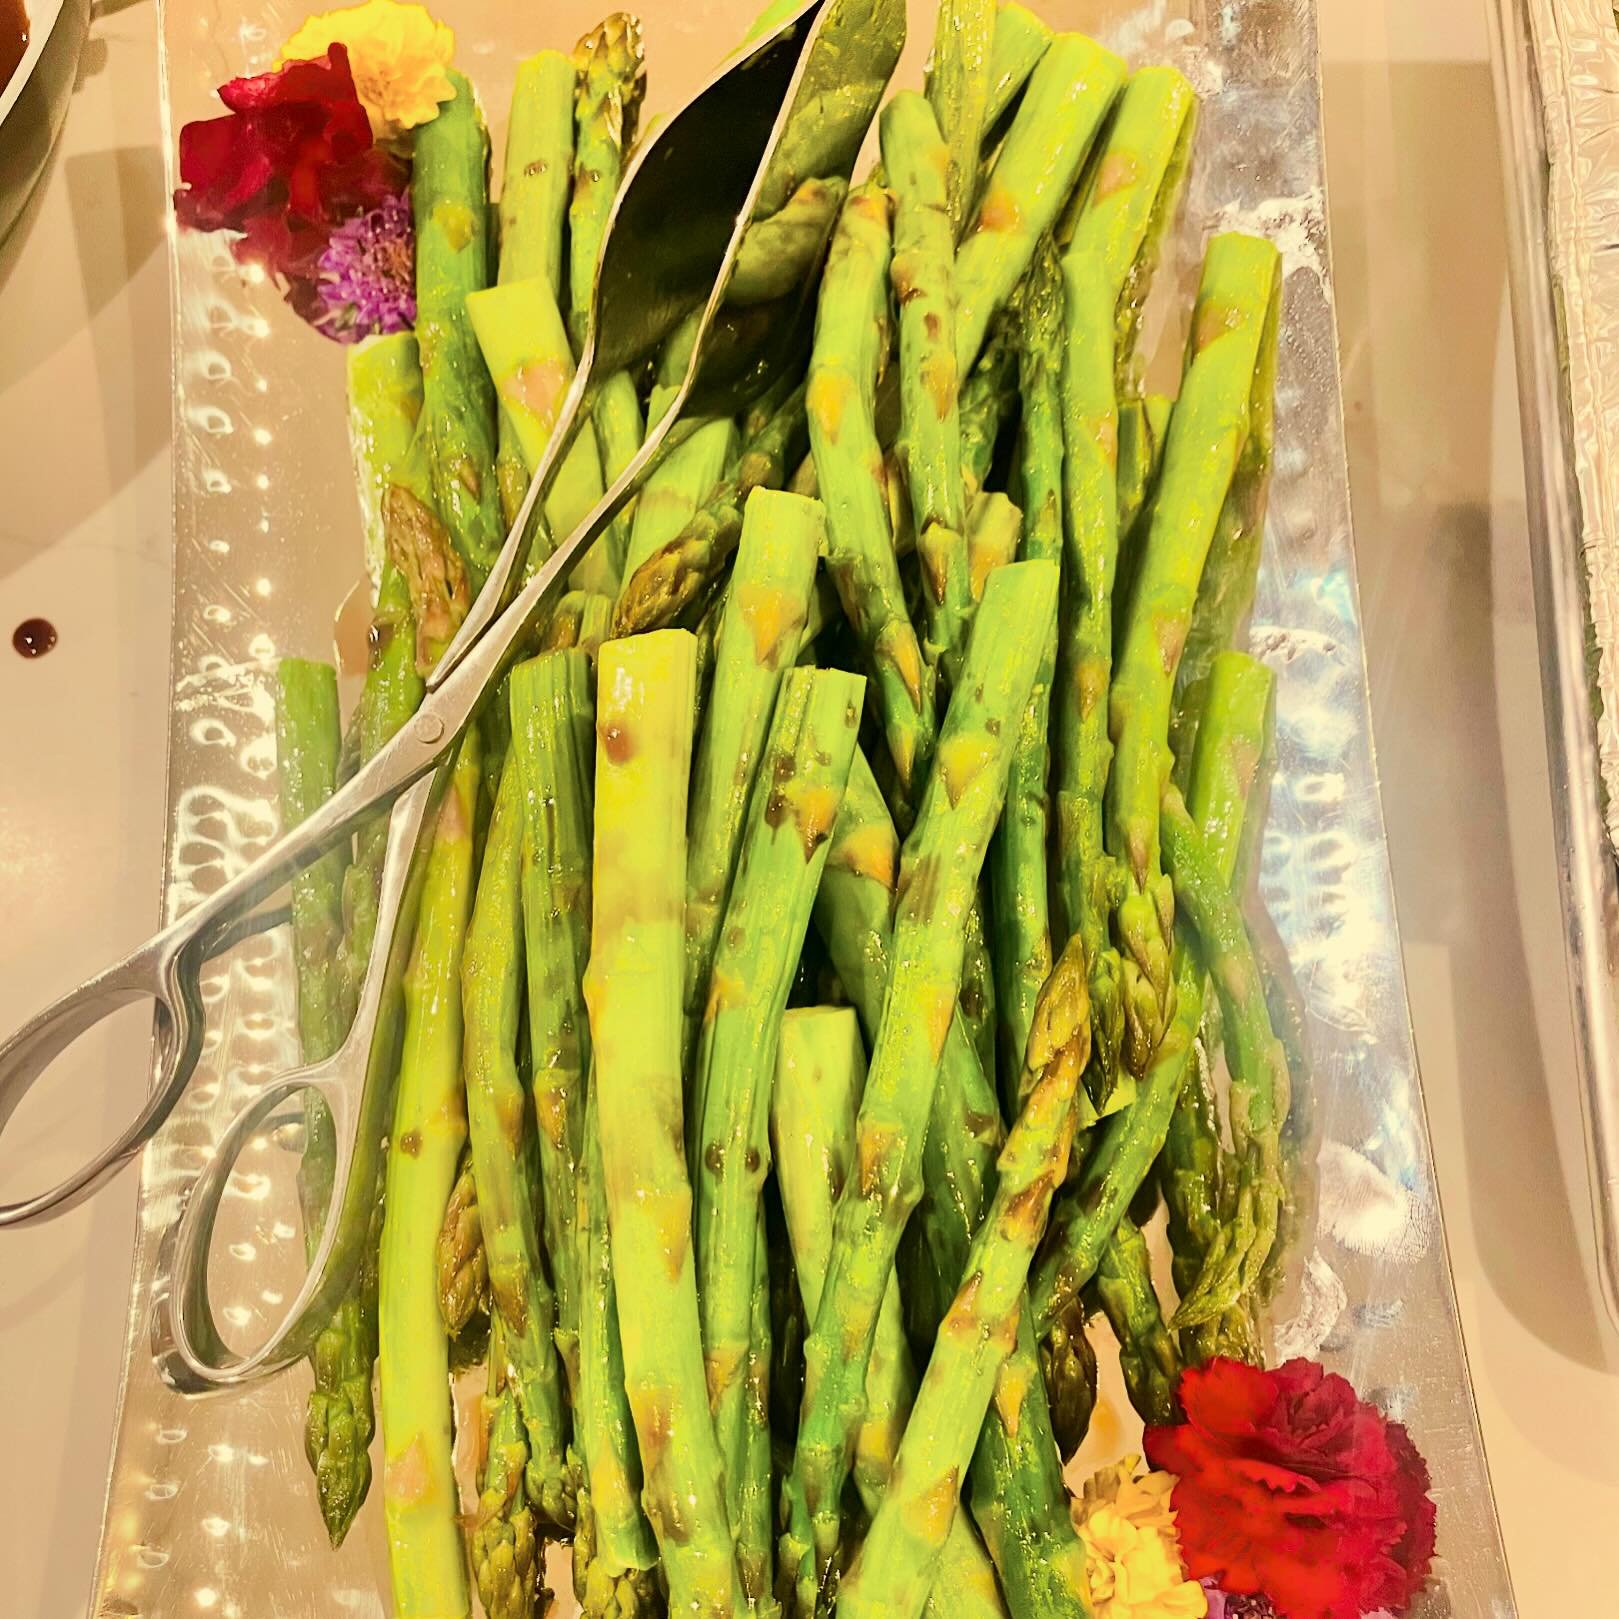 Seared spring asparagus with balsamic glaze. #bluaubergine #fabulousfood #privatechef #catering #nyccatering #passover #vegetarian #springfoods